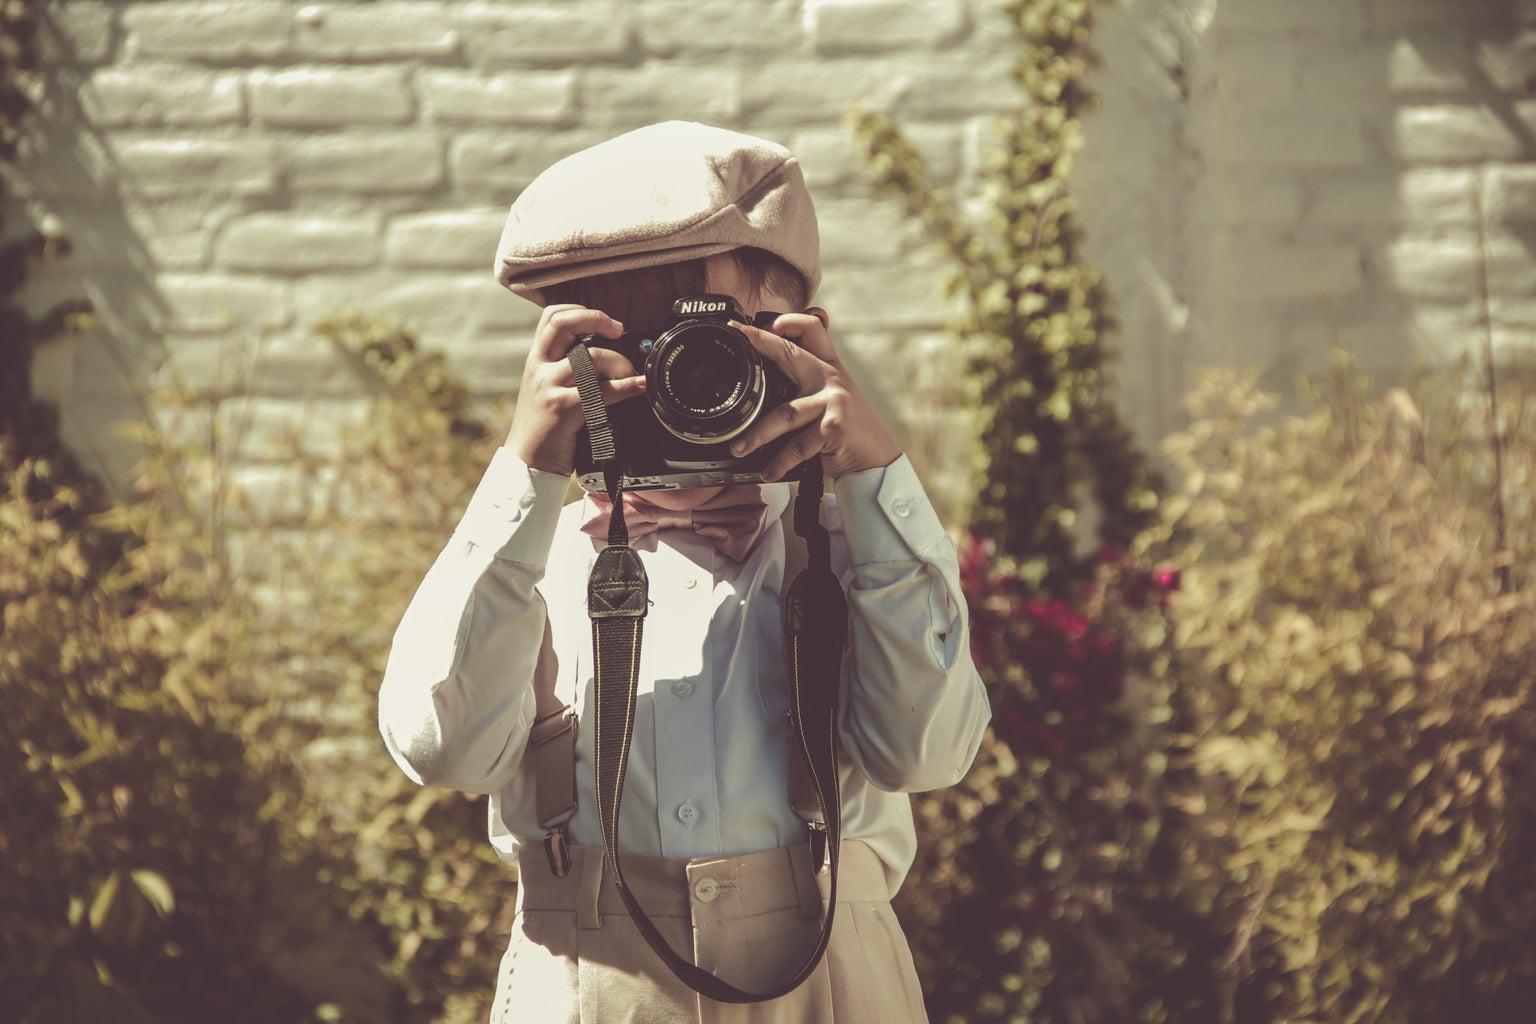 A boy in overalls and a beige hat holding up a Nikon and taking a photo